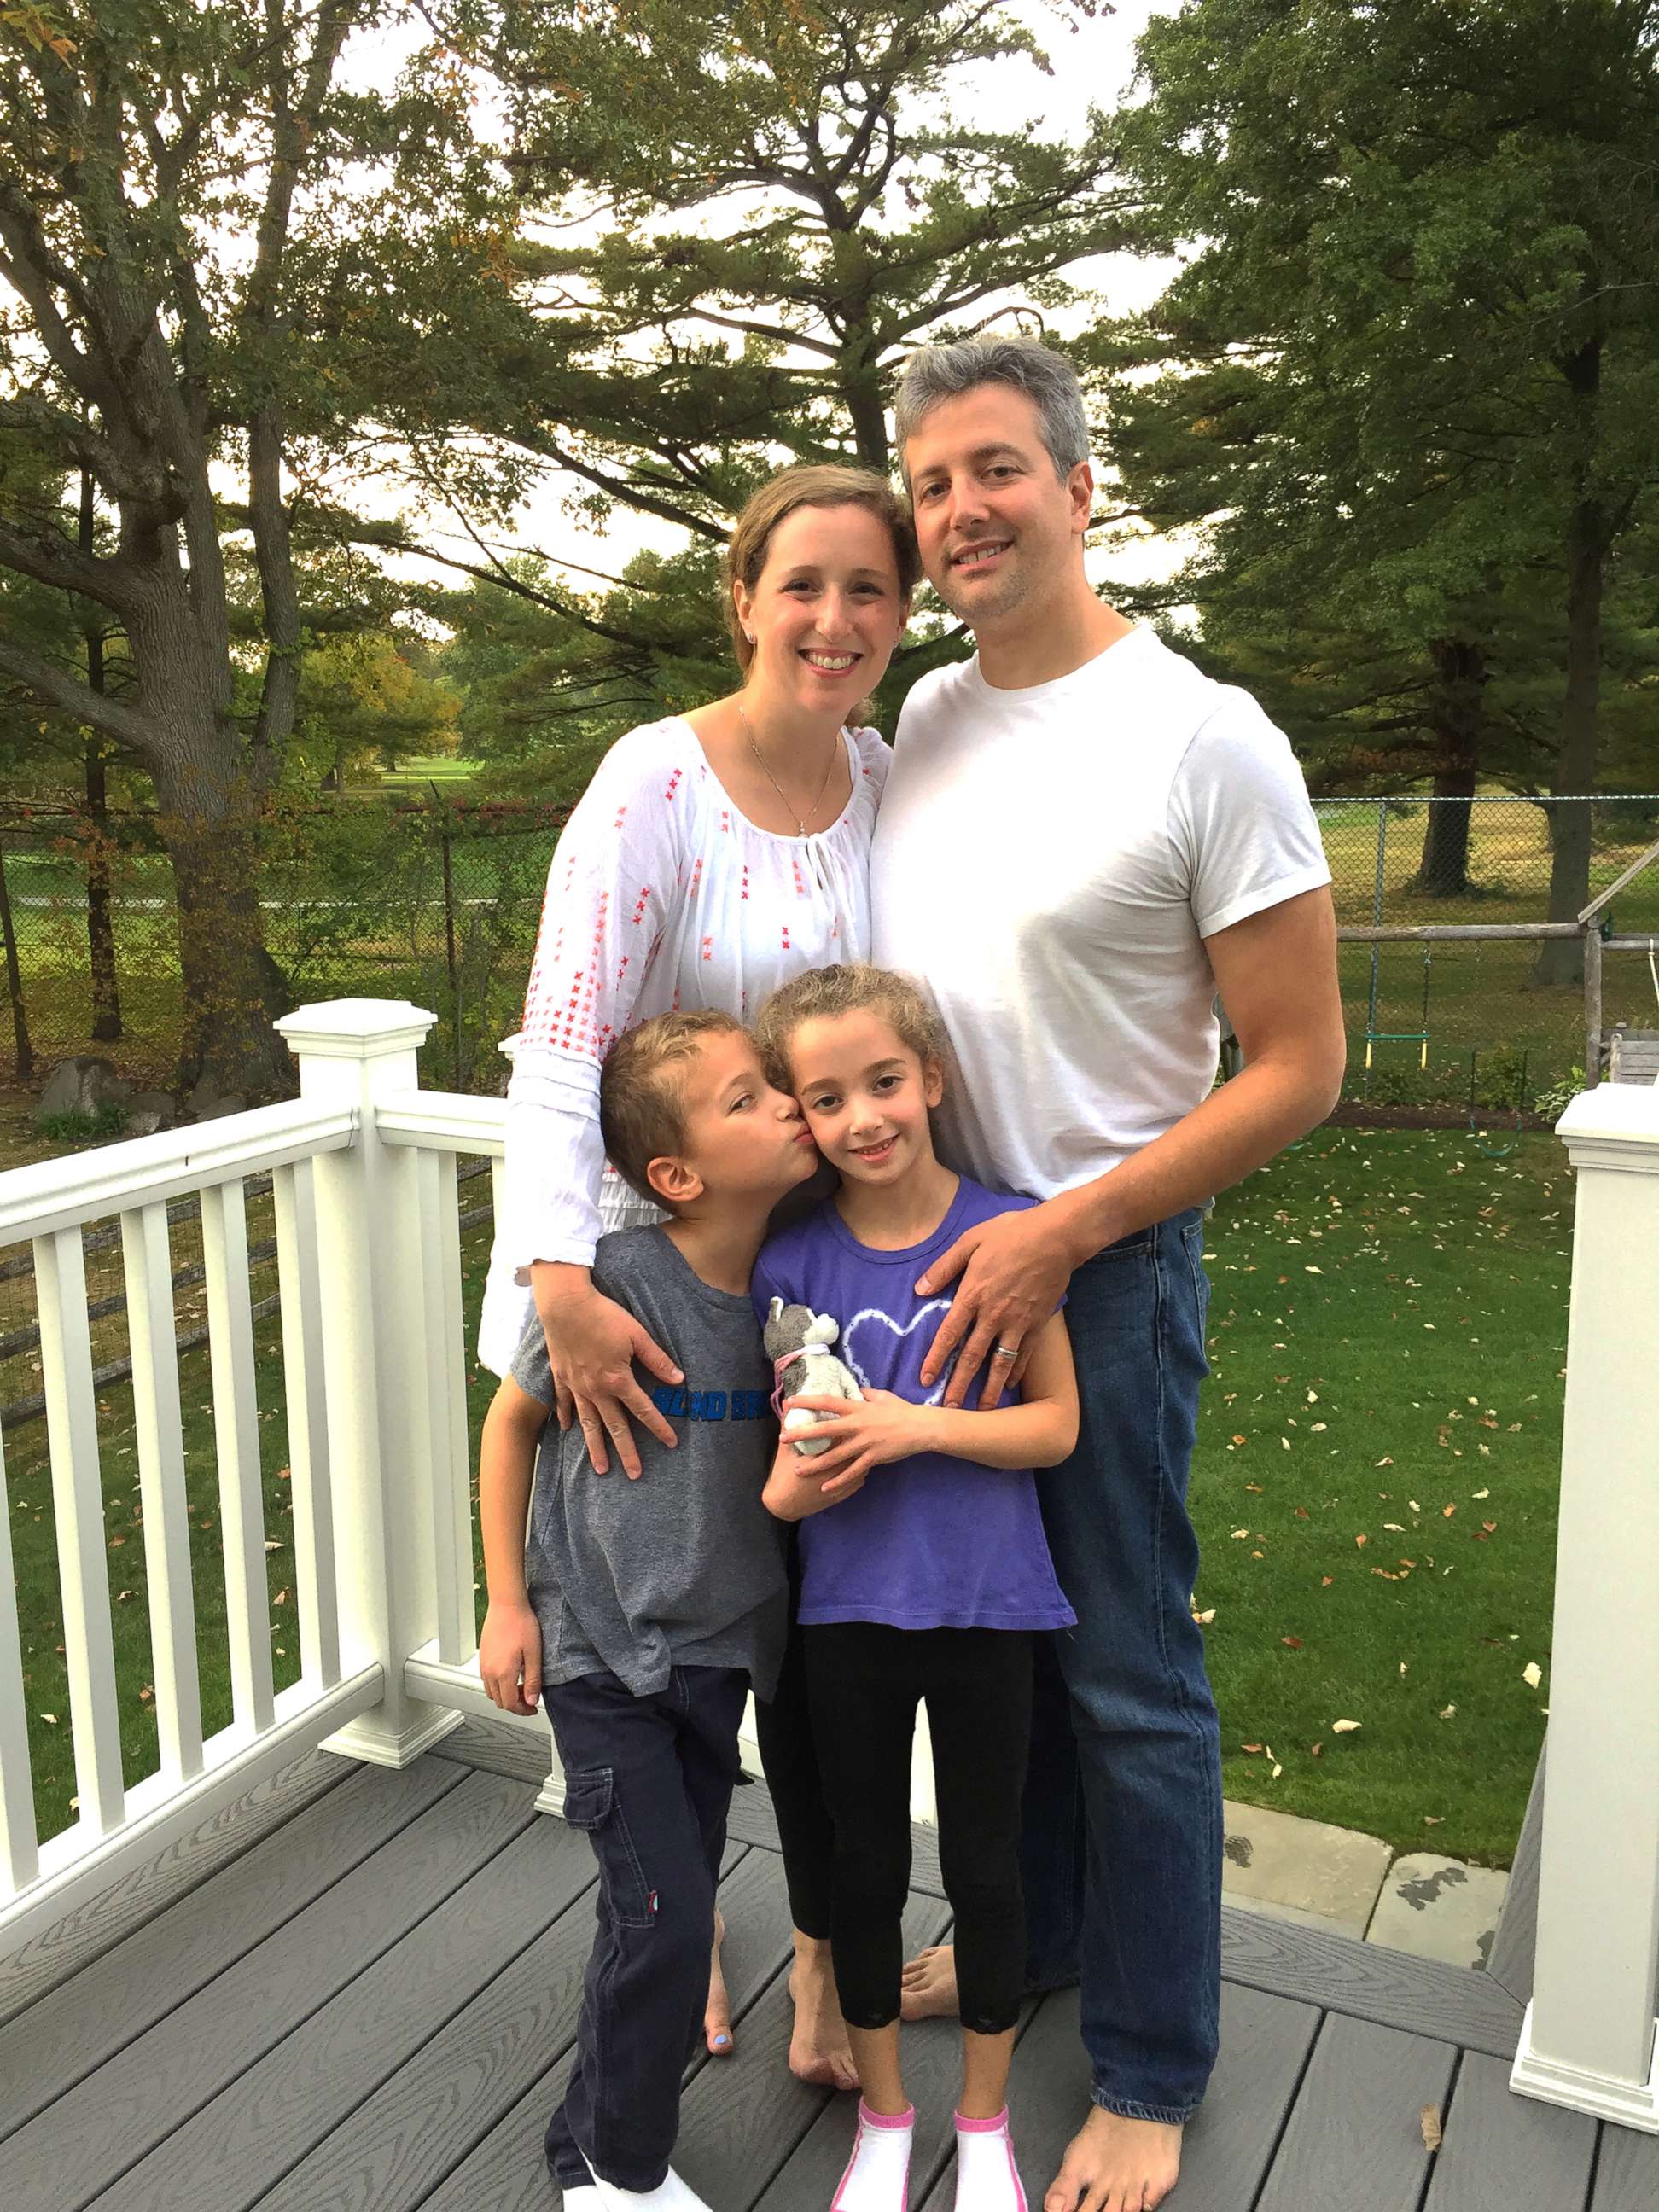 PHOTO: Shari Austrian, of Rye Brook, New York, is photographed with her family.